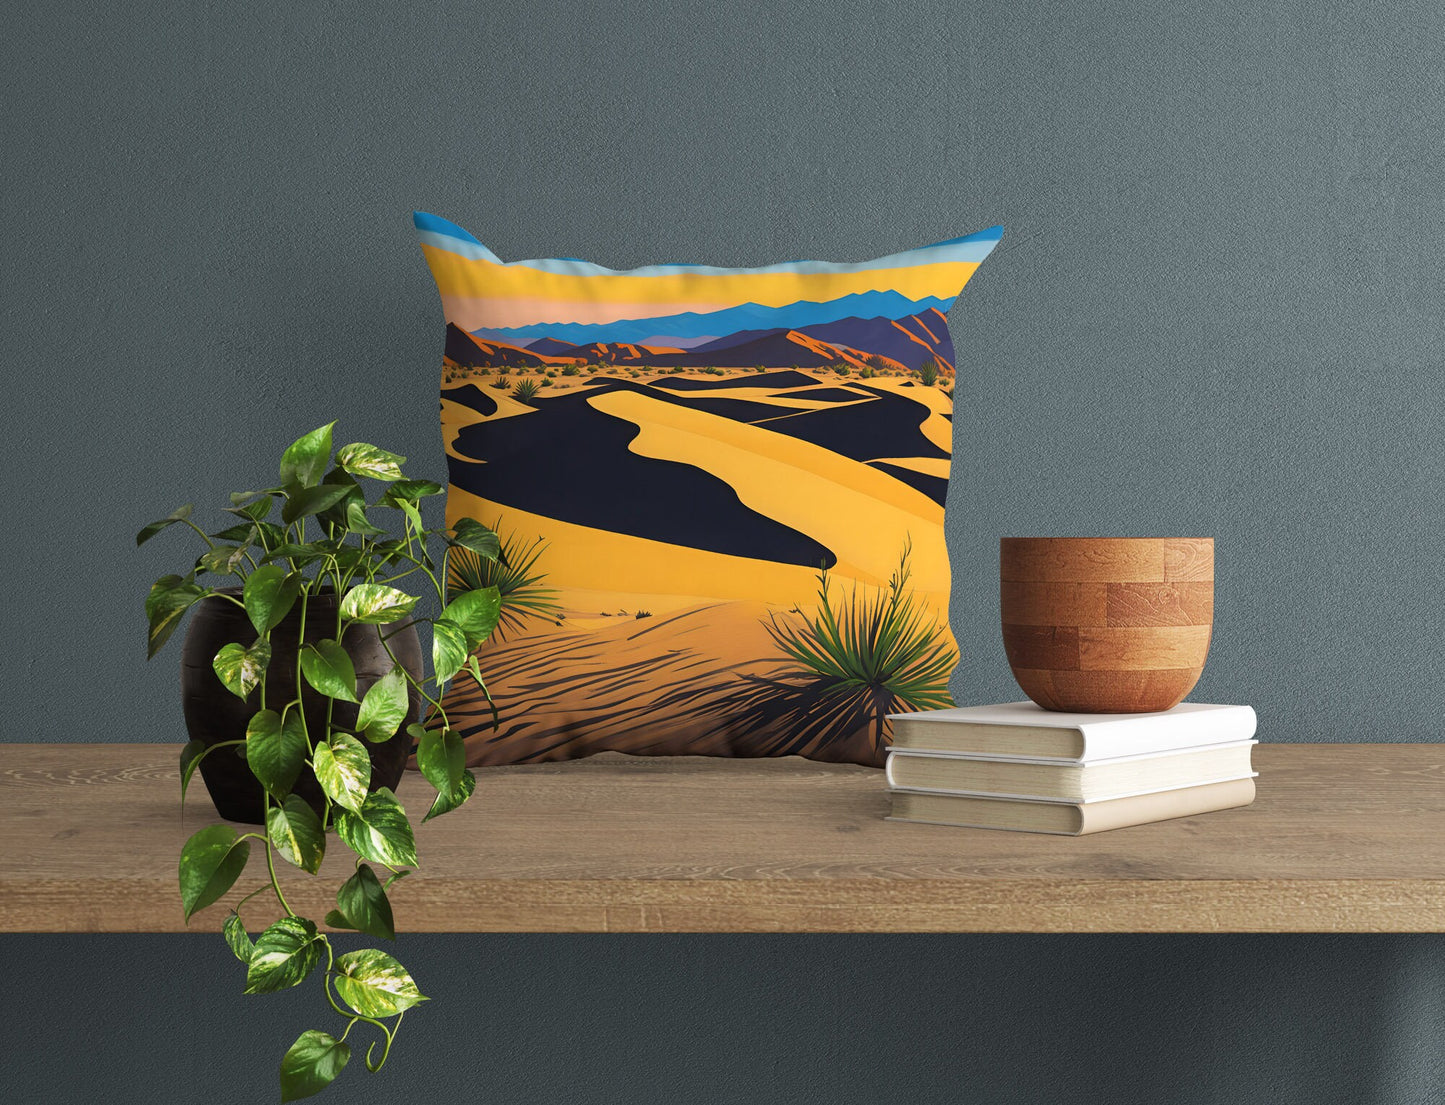 Mesquite Flat Sand Dunes In Death Valley National Park, California Pillow Case, Usa Travel Pillow, 24X24 Pillow Case, Indoor Pillow Cases